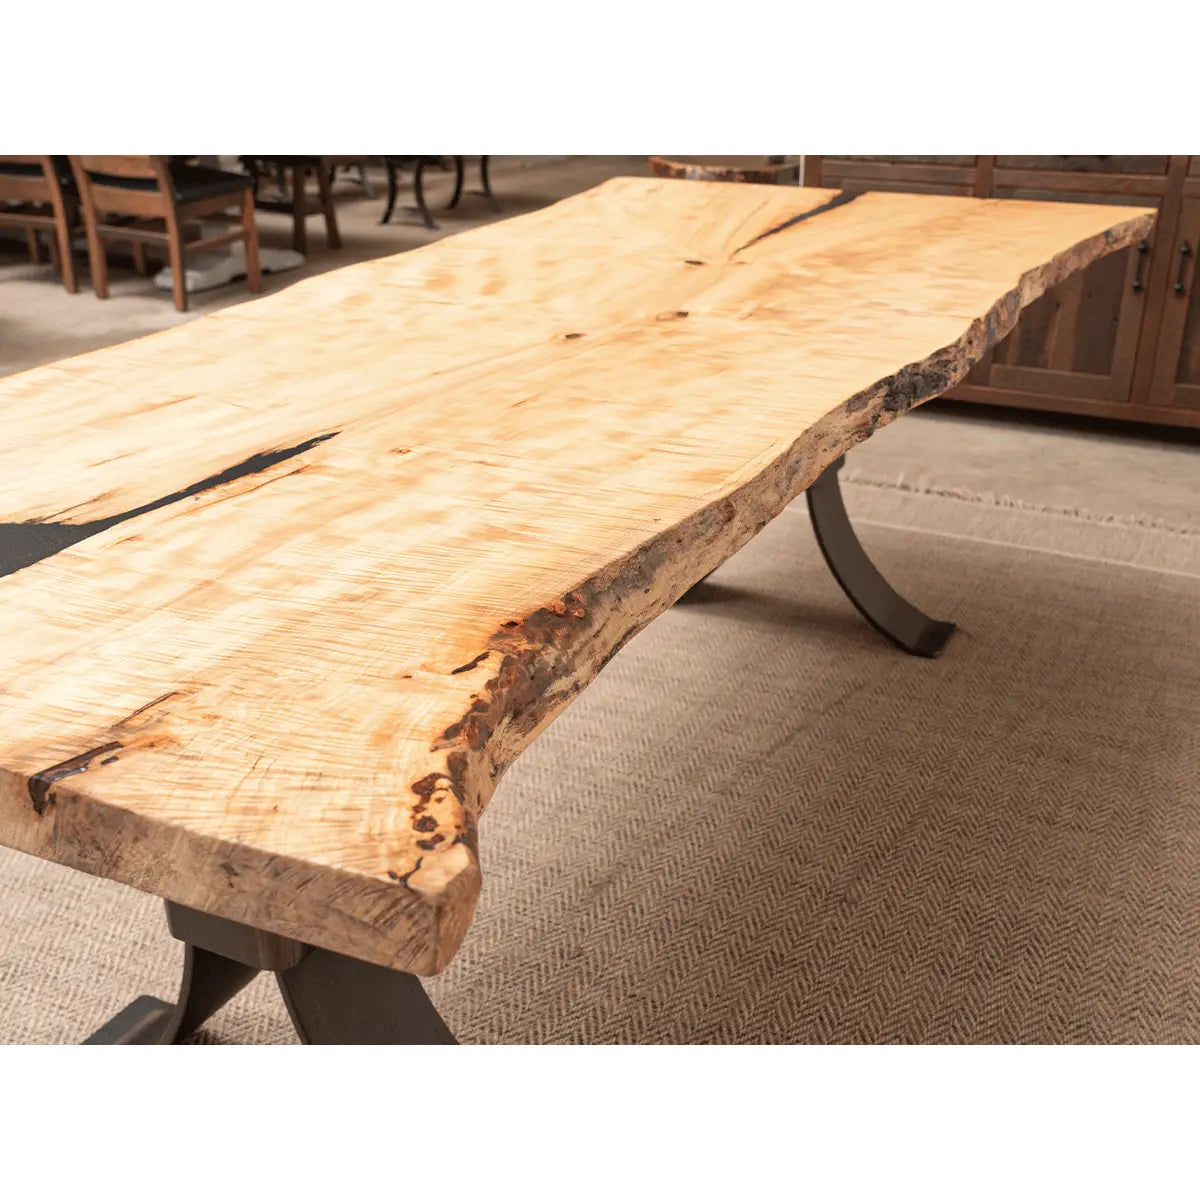 Live Edge Curly Maple Dining Table Slab Details